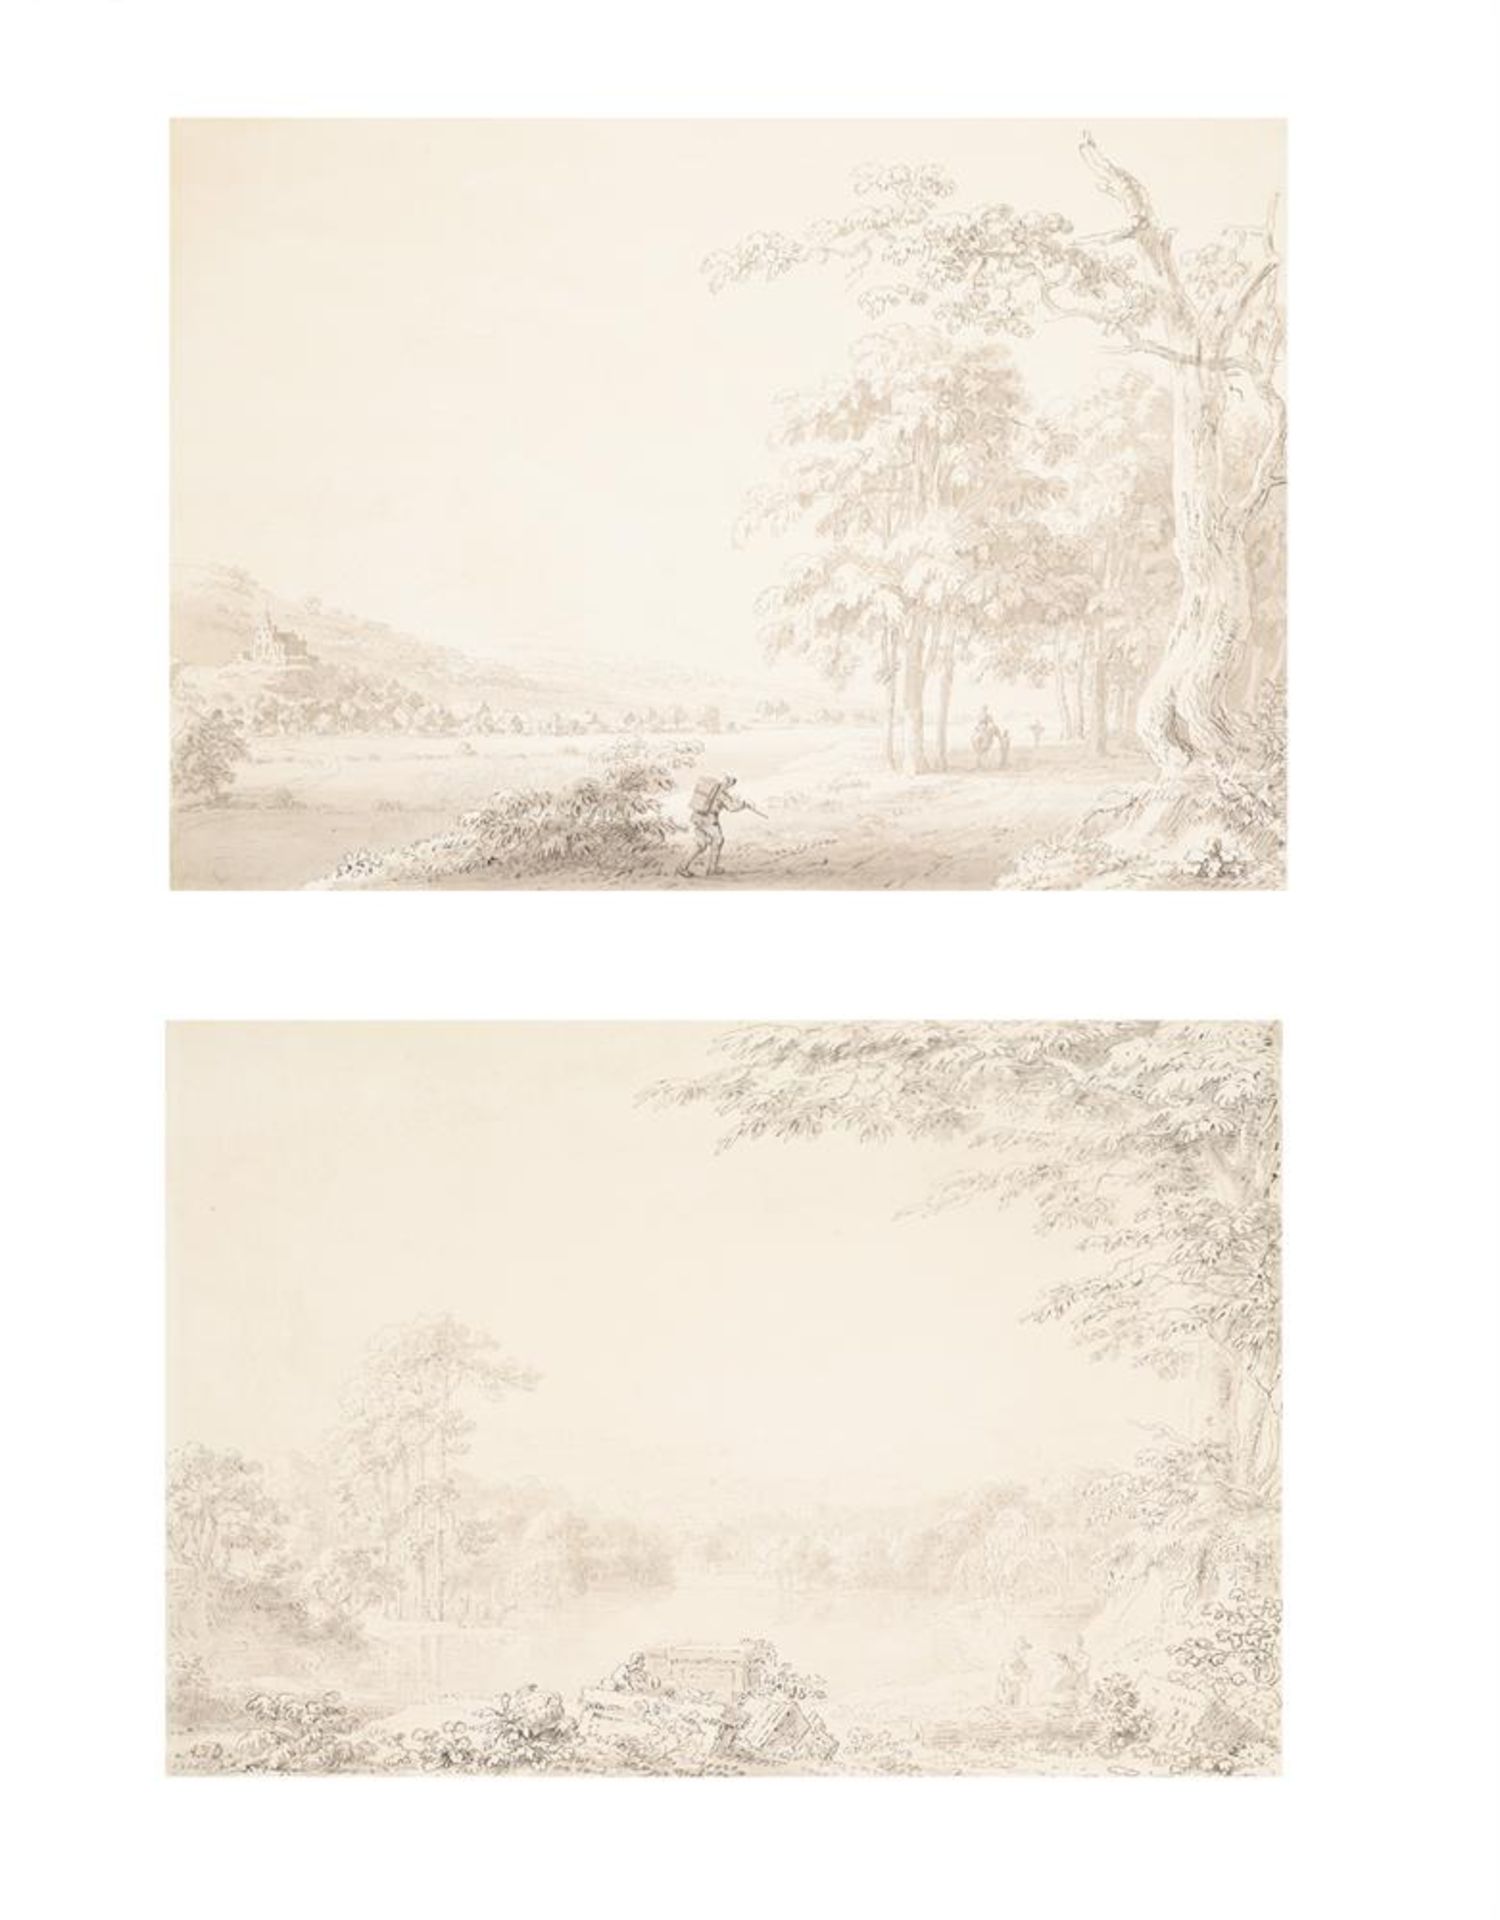 ANTHONY DEVIS (BRITISH 1729-1817), FIGURES RESTING BY A LAKE; TRAVELLERS ON A ROAD BY A RIVER (2) - Bild 4 aus 5